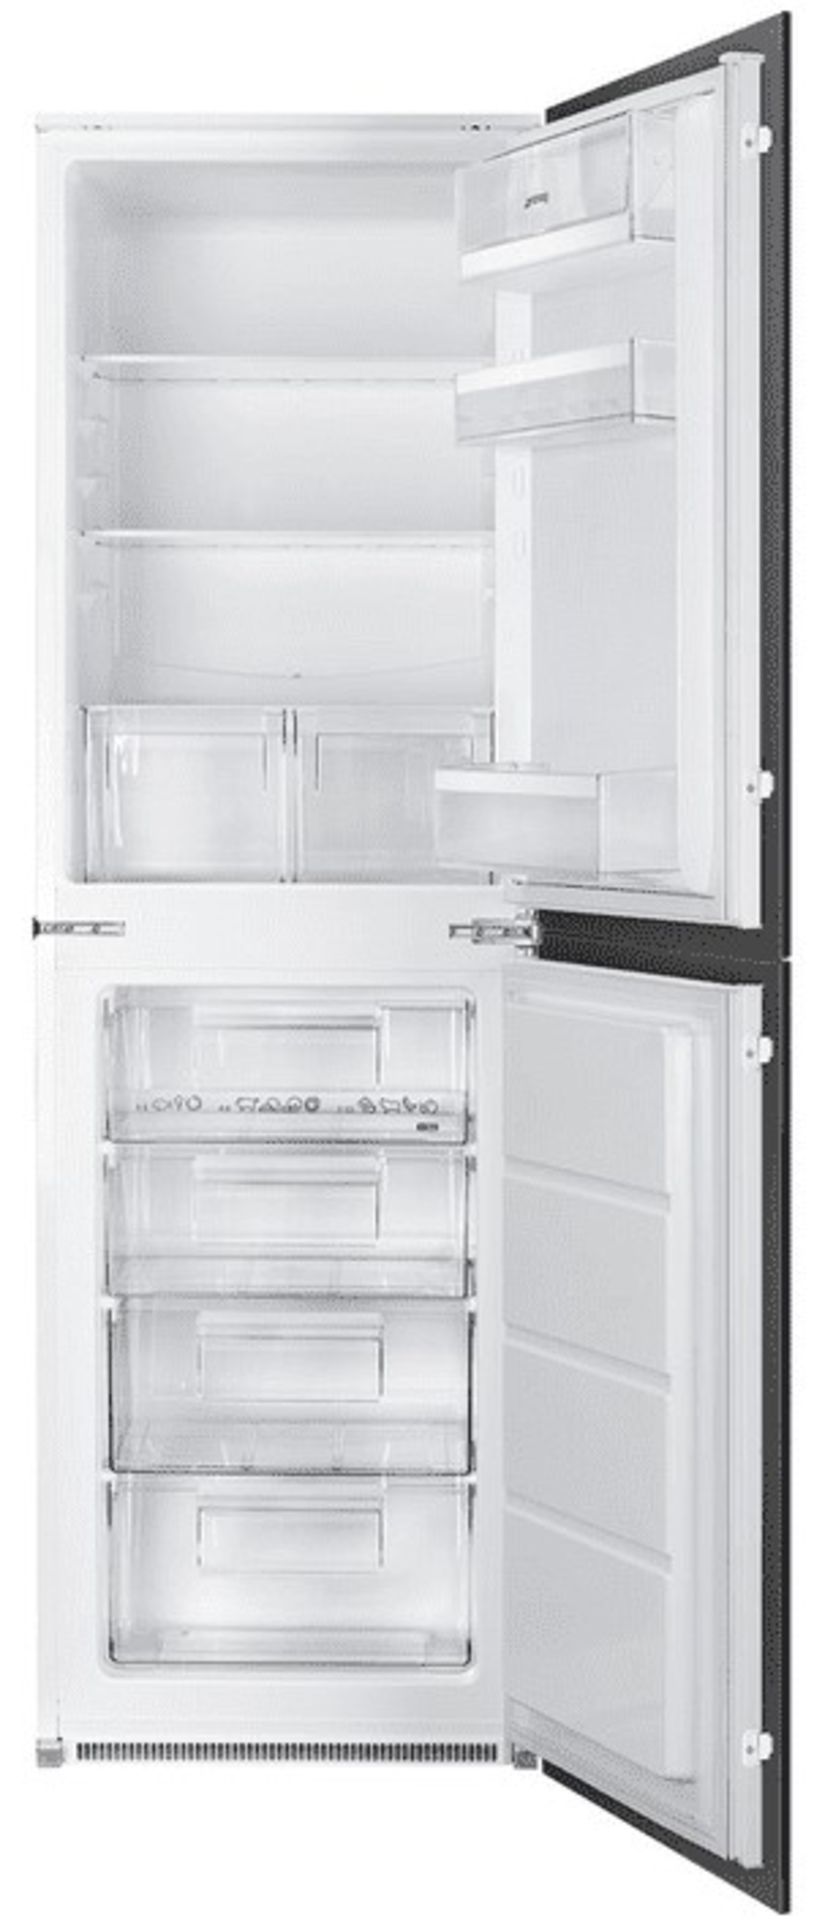 Current Online Price £859. Smeg Universal Built In Right Hinge Refrigerator White UKC4172F - Image 6 of 16